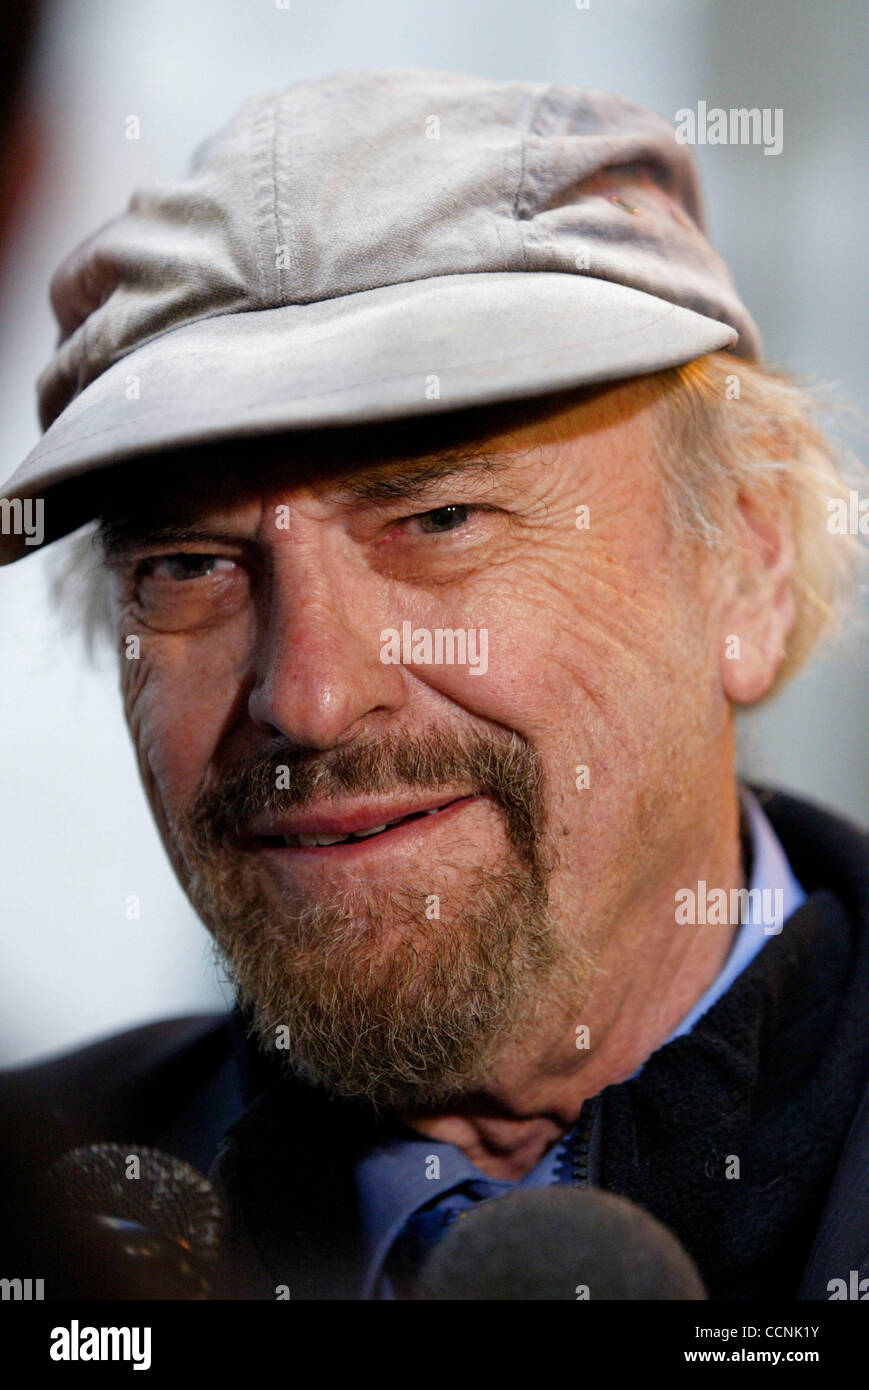 Oct 28, 2004; Manhattan, NY, USA; Actor Rip Torn leaves Manhattan Criminal Court, Thursday, Oct. 28, 2004, in New York. Torn was found not guilty on the charge of driving while intoxicated from an incident in January when his car rammed the back of a cab in Manhattan. Stock Photo